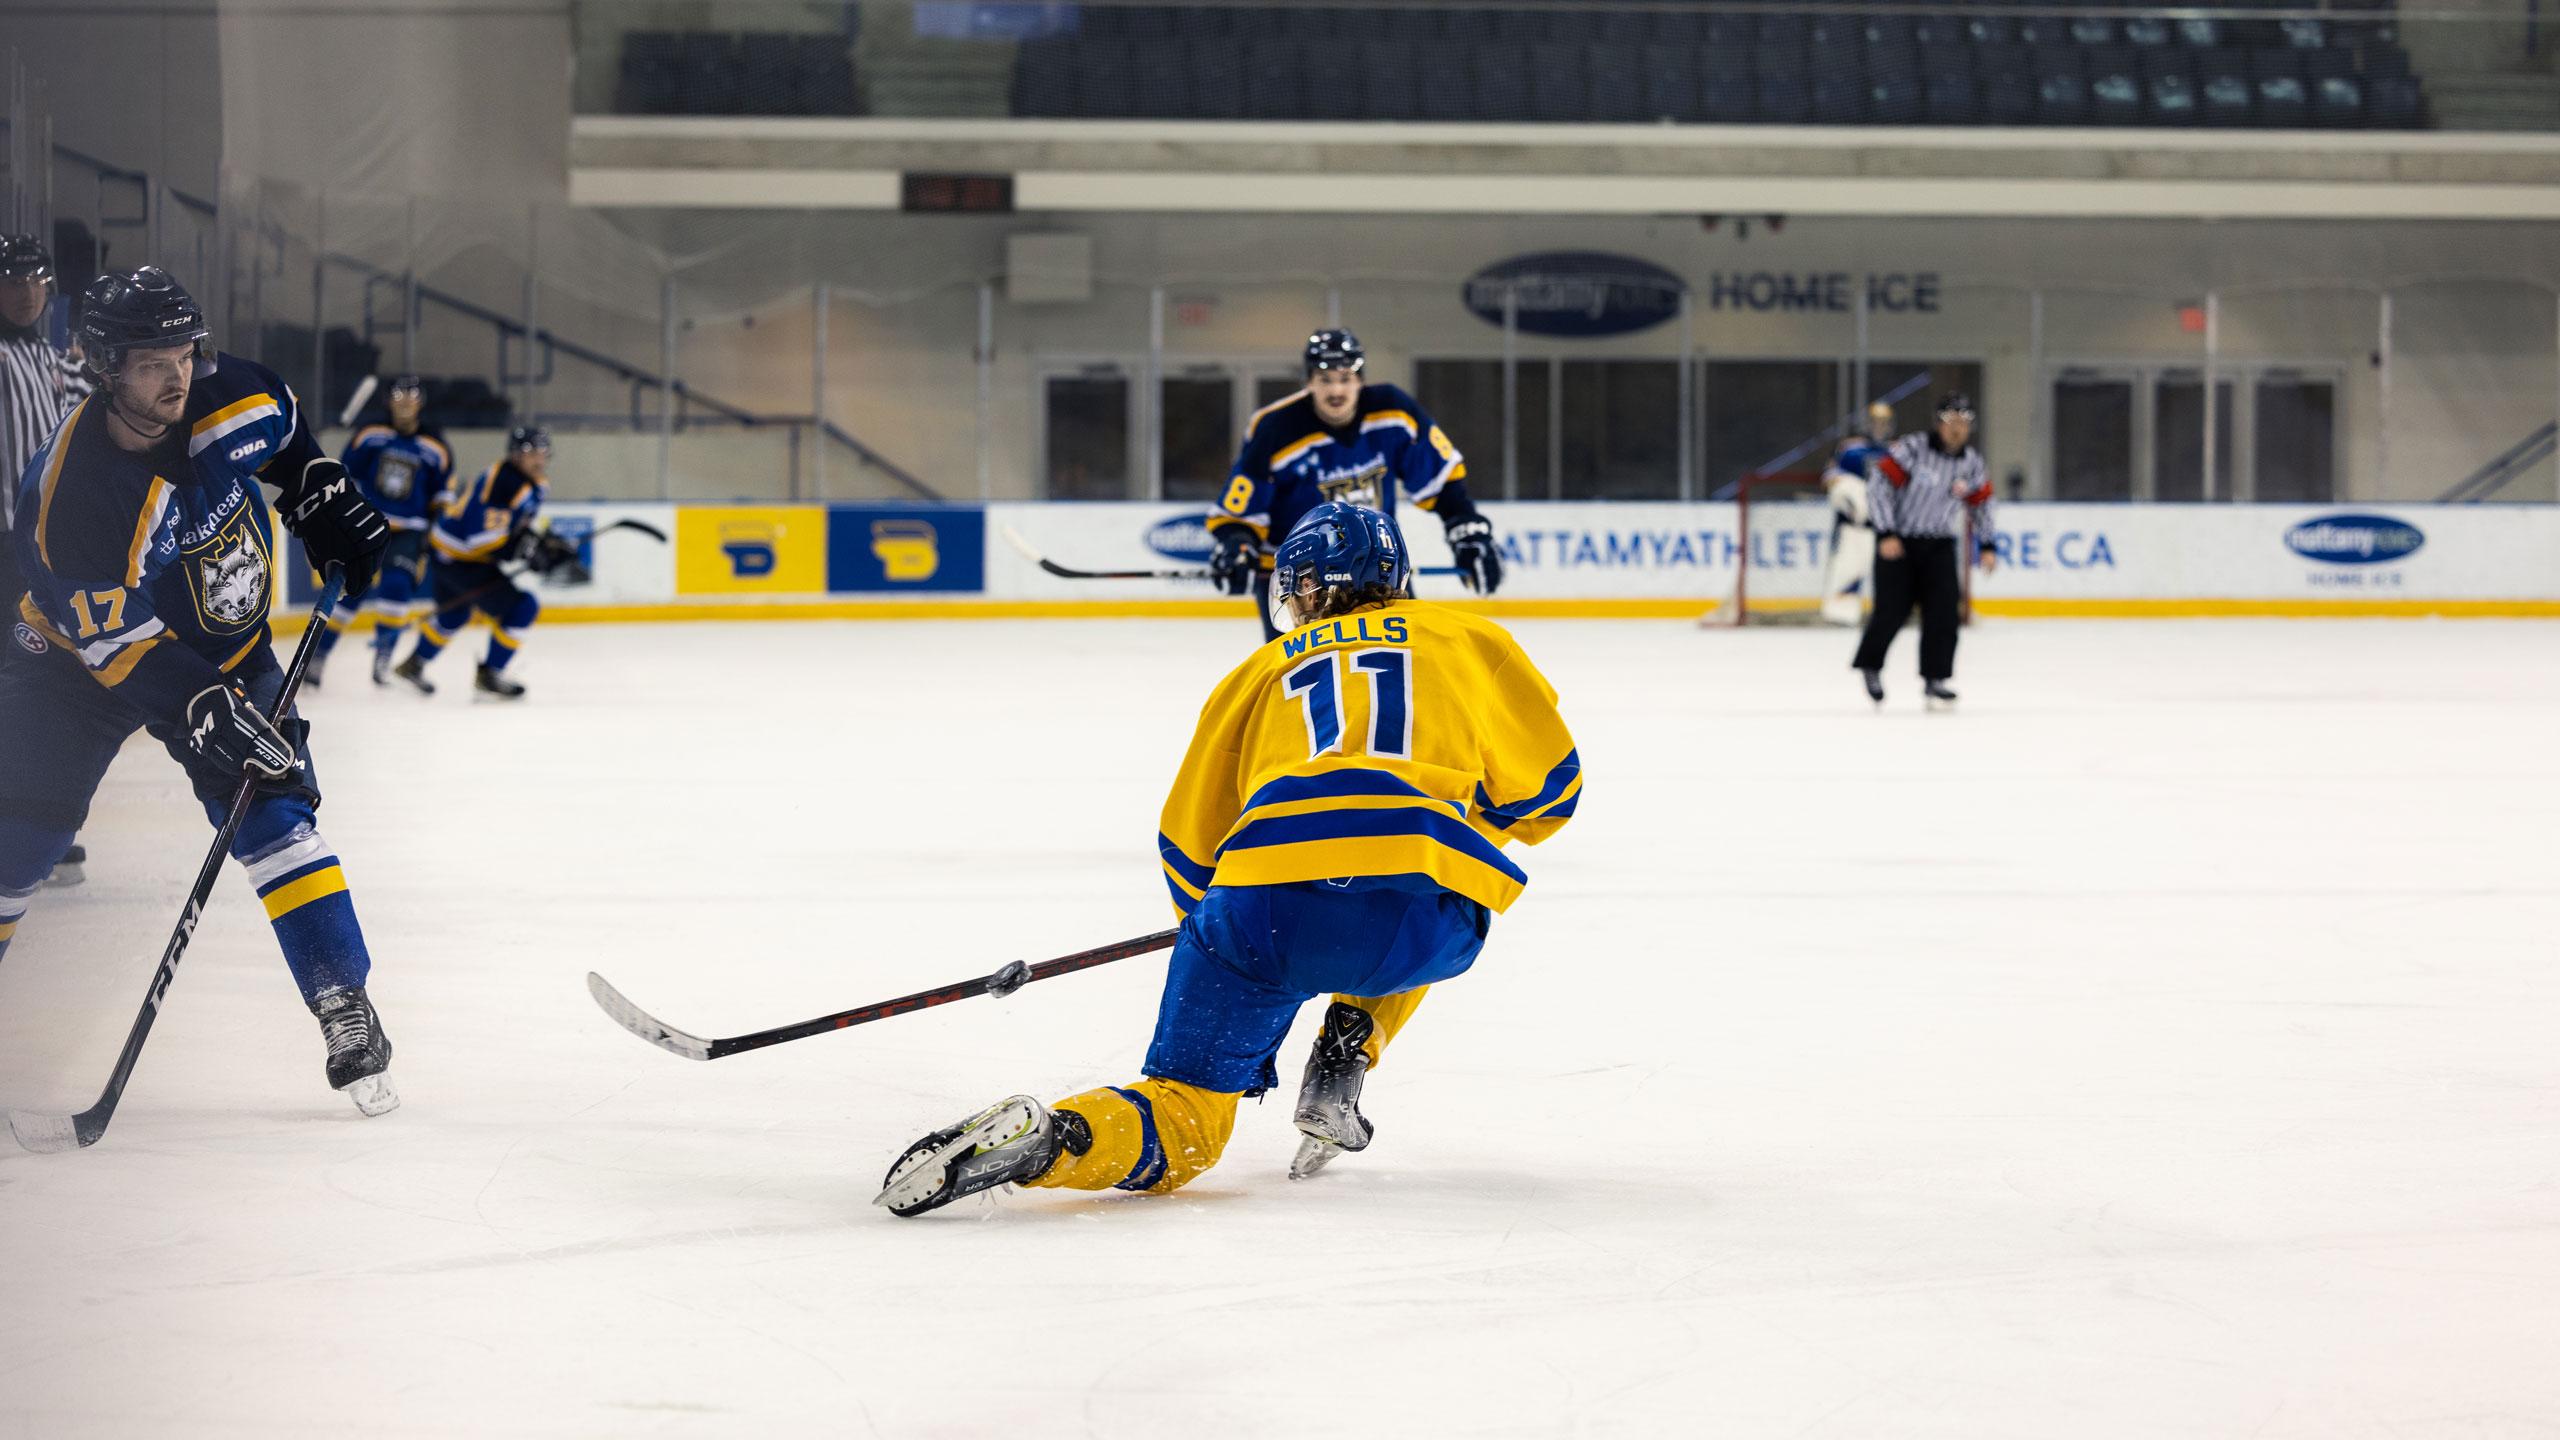 A TMU men's hockey player in a yellow jersey down on one knee blocking a shot